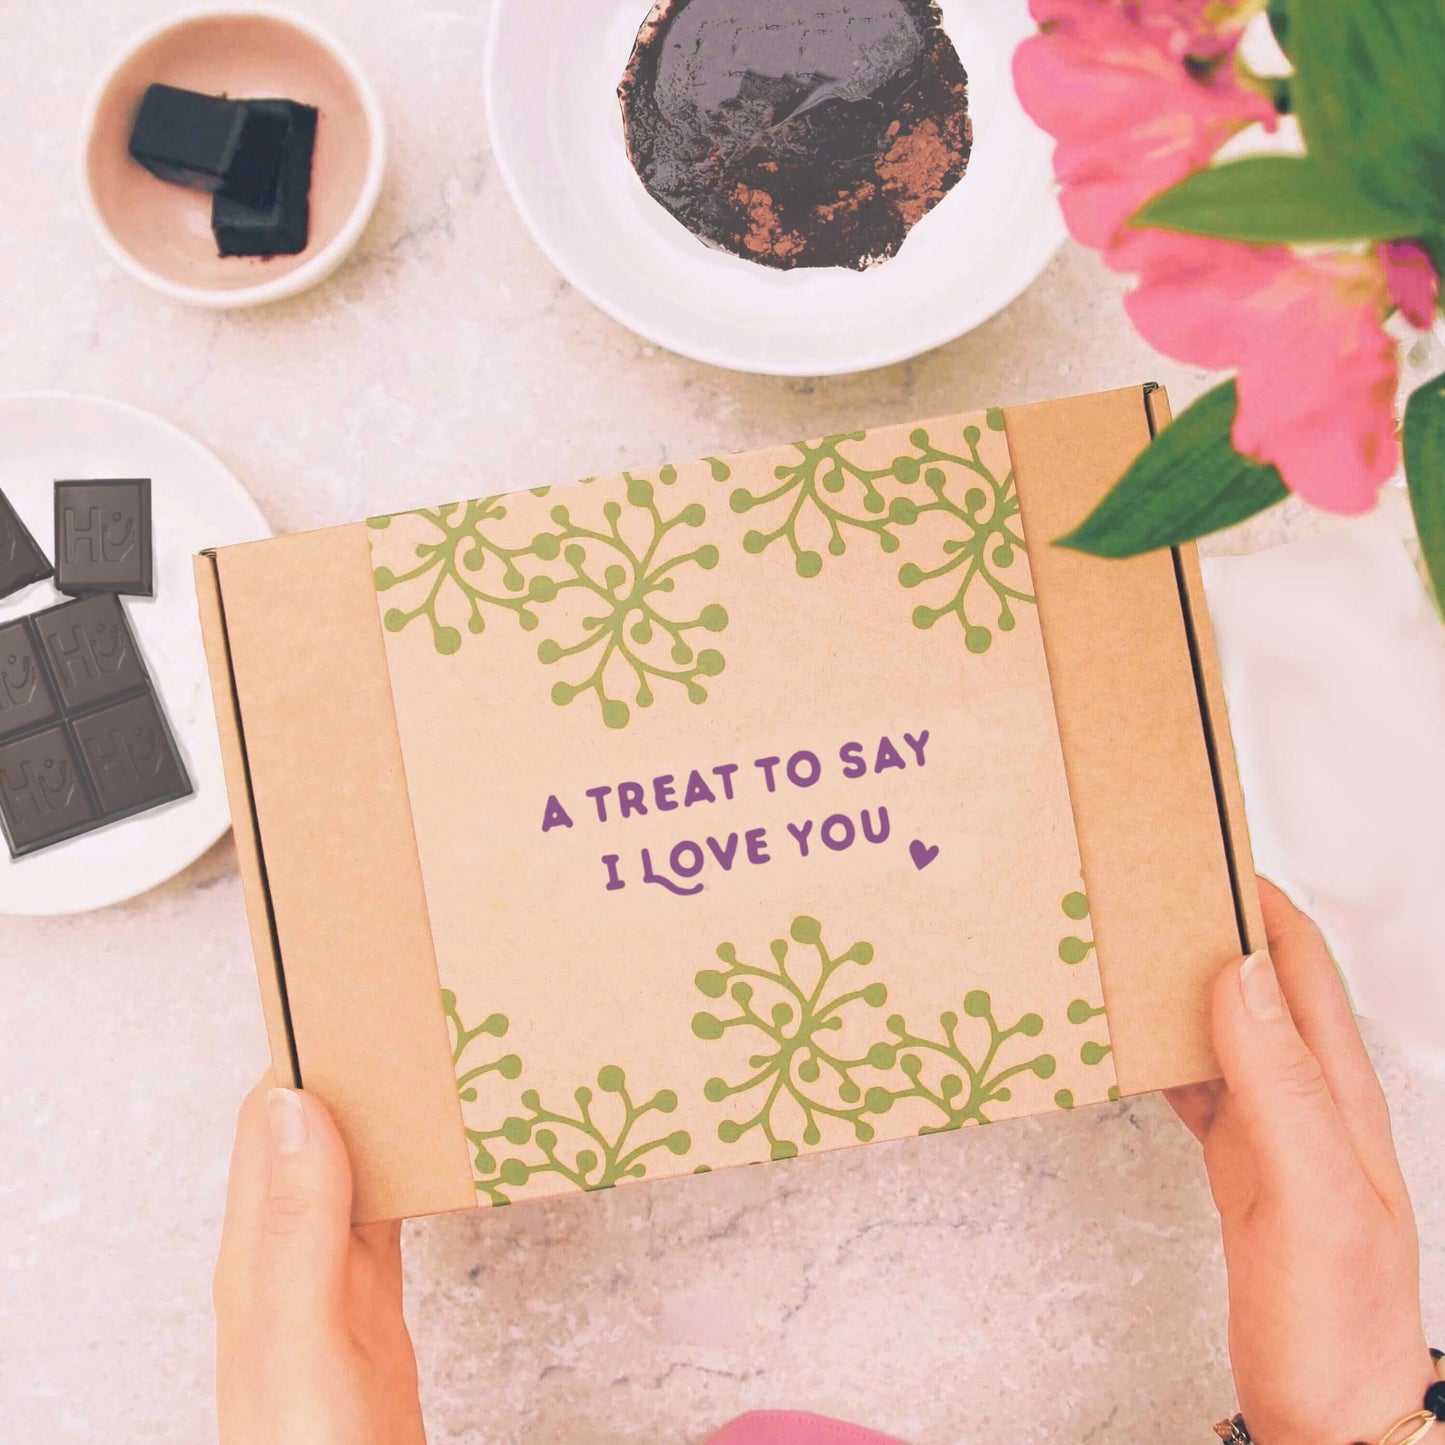 letterbox gift with gift message ' a treat to say i love you'